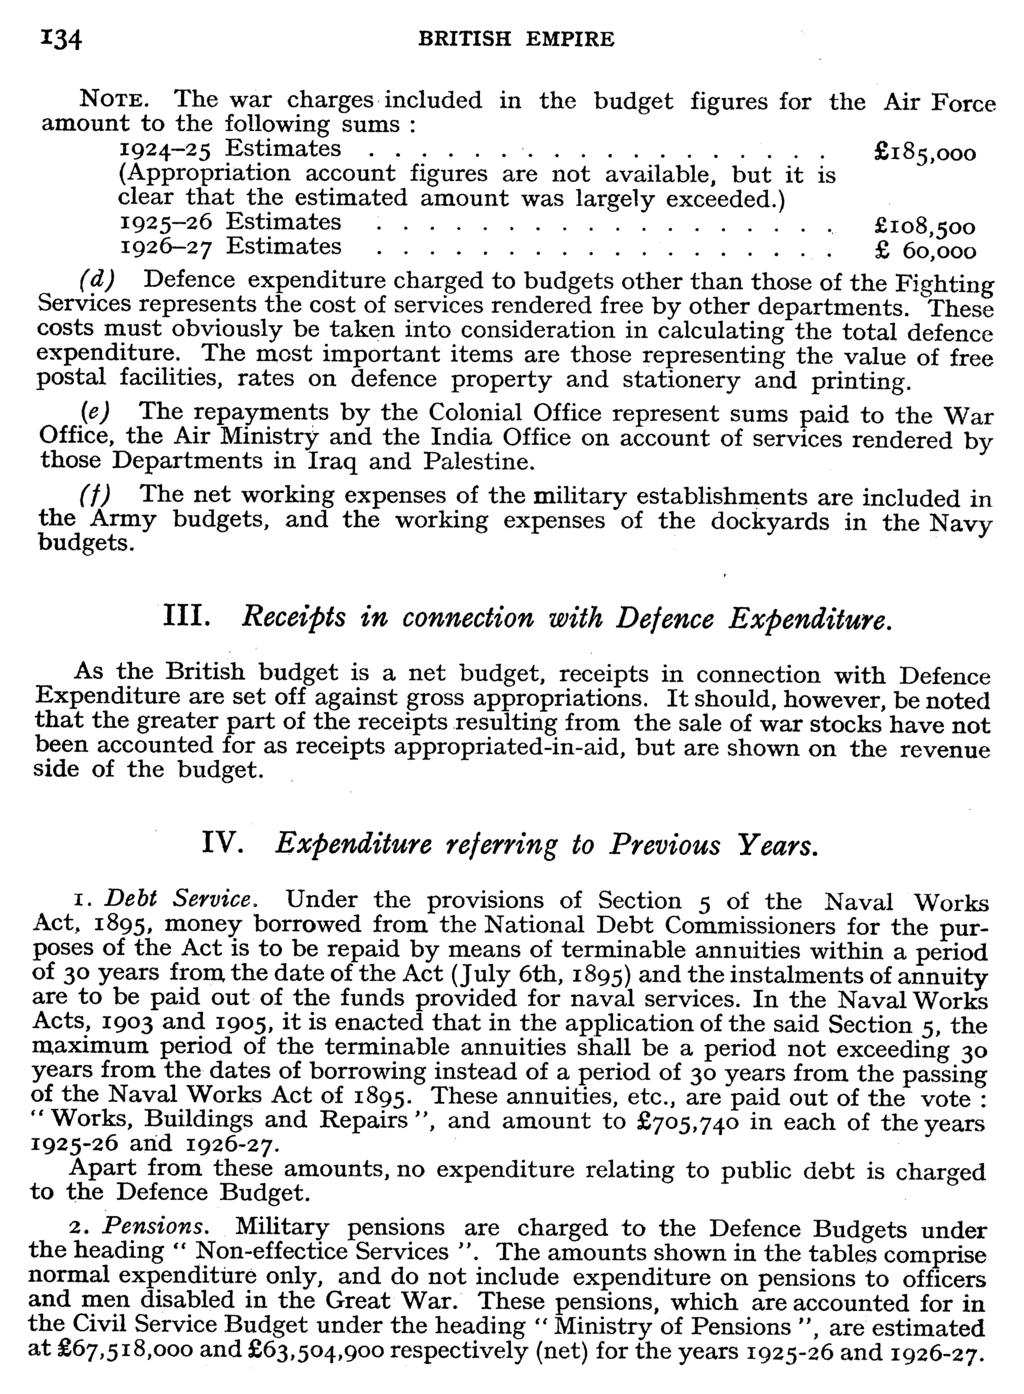 134 BRITISH EMPIRE NOTE. The war charges included in the budget figures for the Air Force amount to the following sums : 1924-25 Estimates.